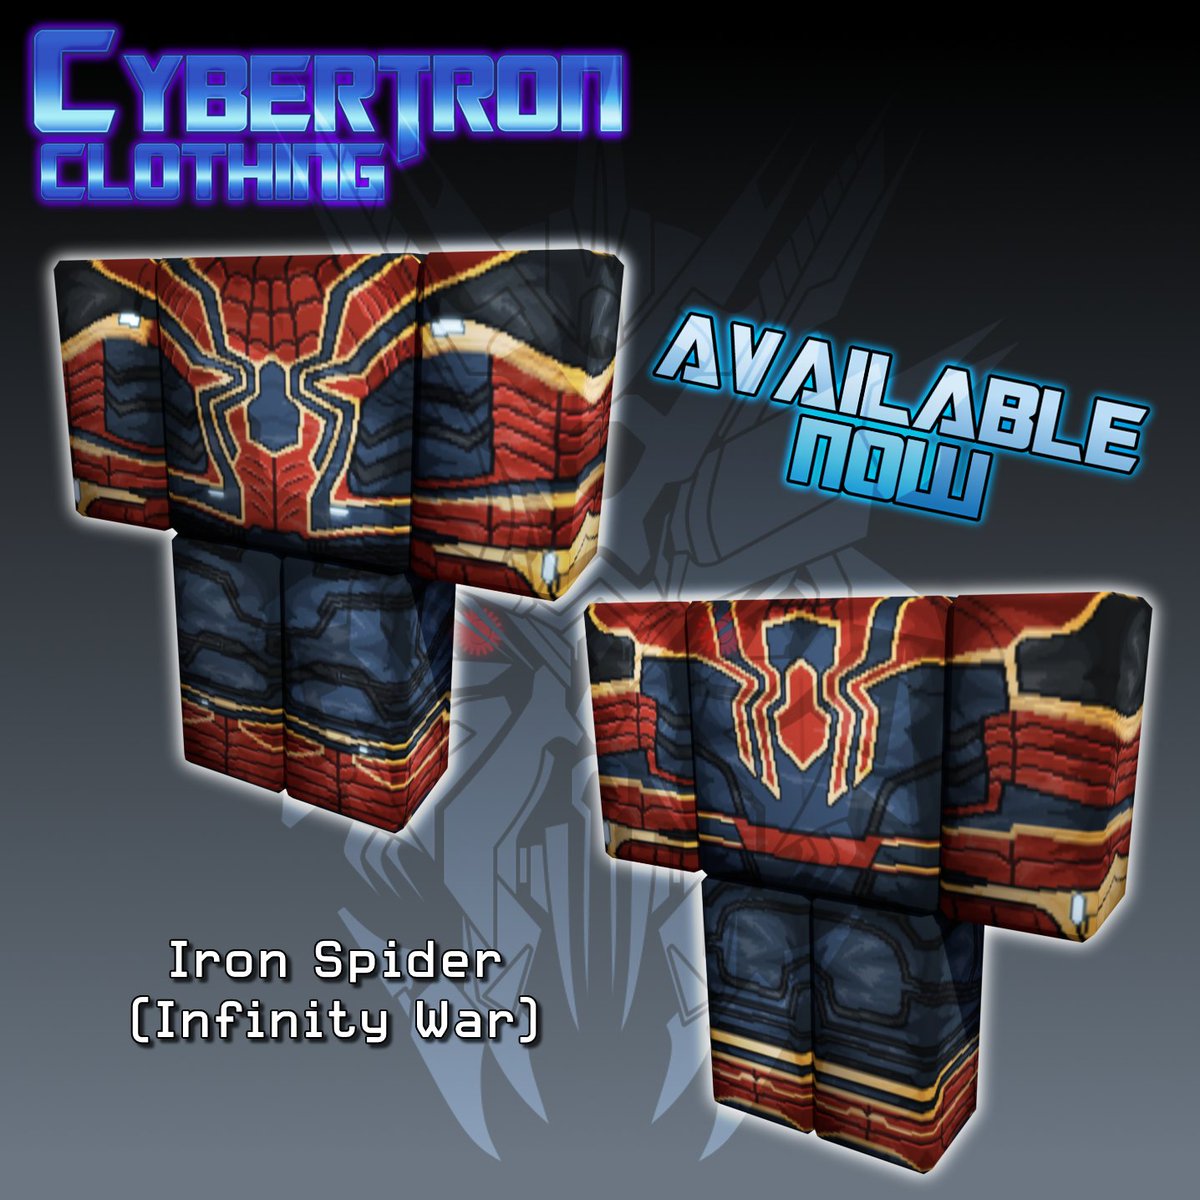 Blackout On Twitter The Iron Spider Armor From Infinity War Is Now On Sale Buy It On Cybertron Clothing Https T Co 6yn78qwiz0 Https T Co Lraompjap1 Https T Co K8gohzsm83 Roblox Robloxdev Robloxclothing Robloxgfx Spiderman Infinitywar - spiderman t shirt roblox